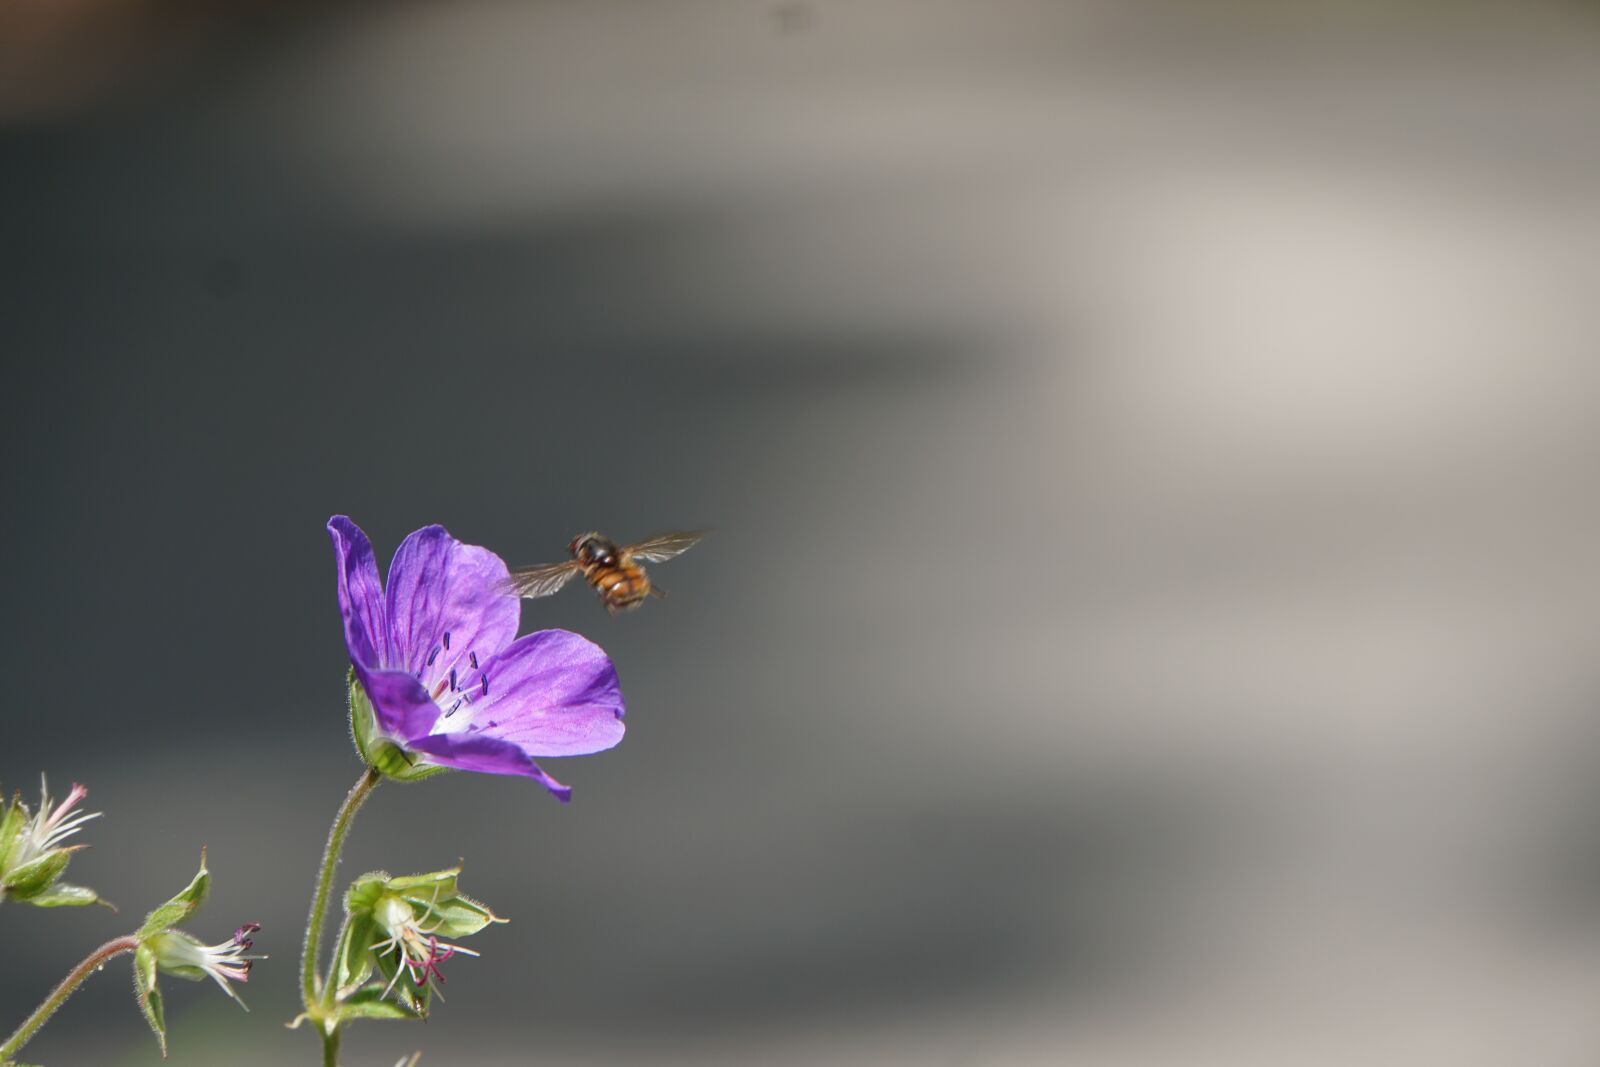 Sony a6000 sample photo. Flower, bee, pollination photography